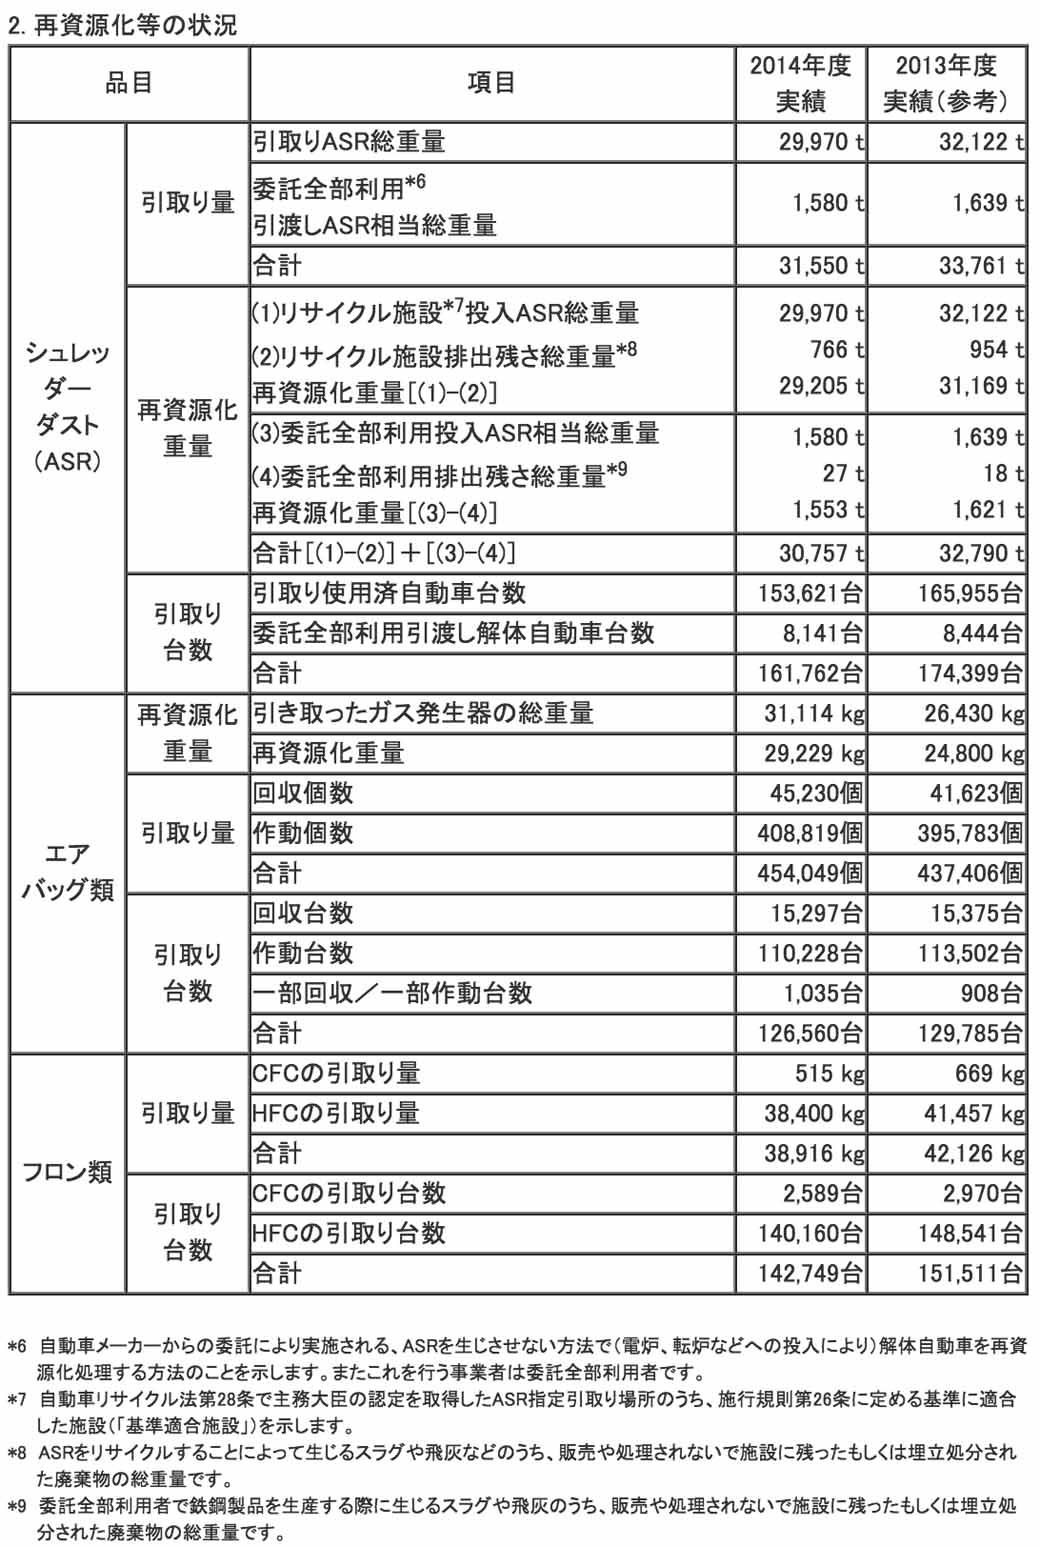 mazda-implementation-status-publication-of-the-automobile-recycling-law20150601-2-min